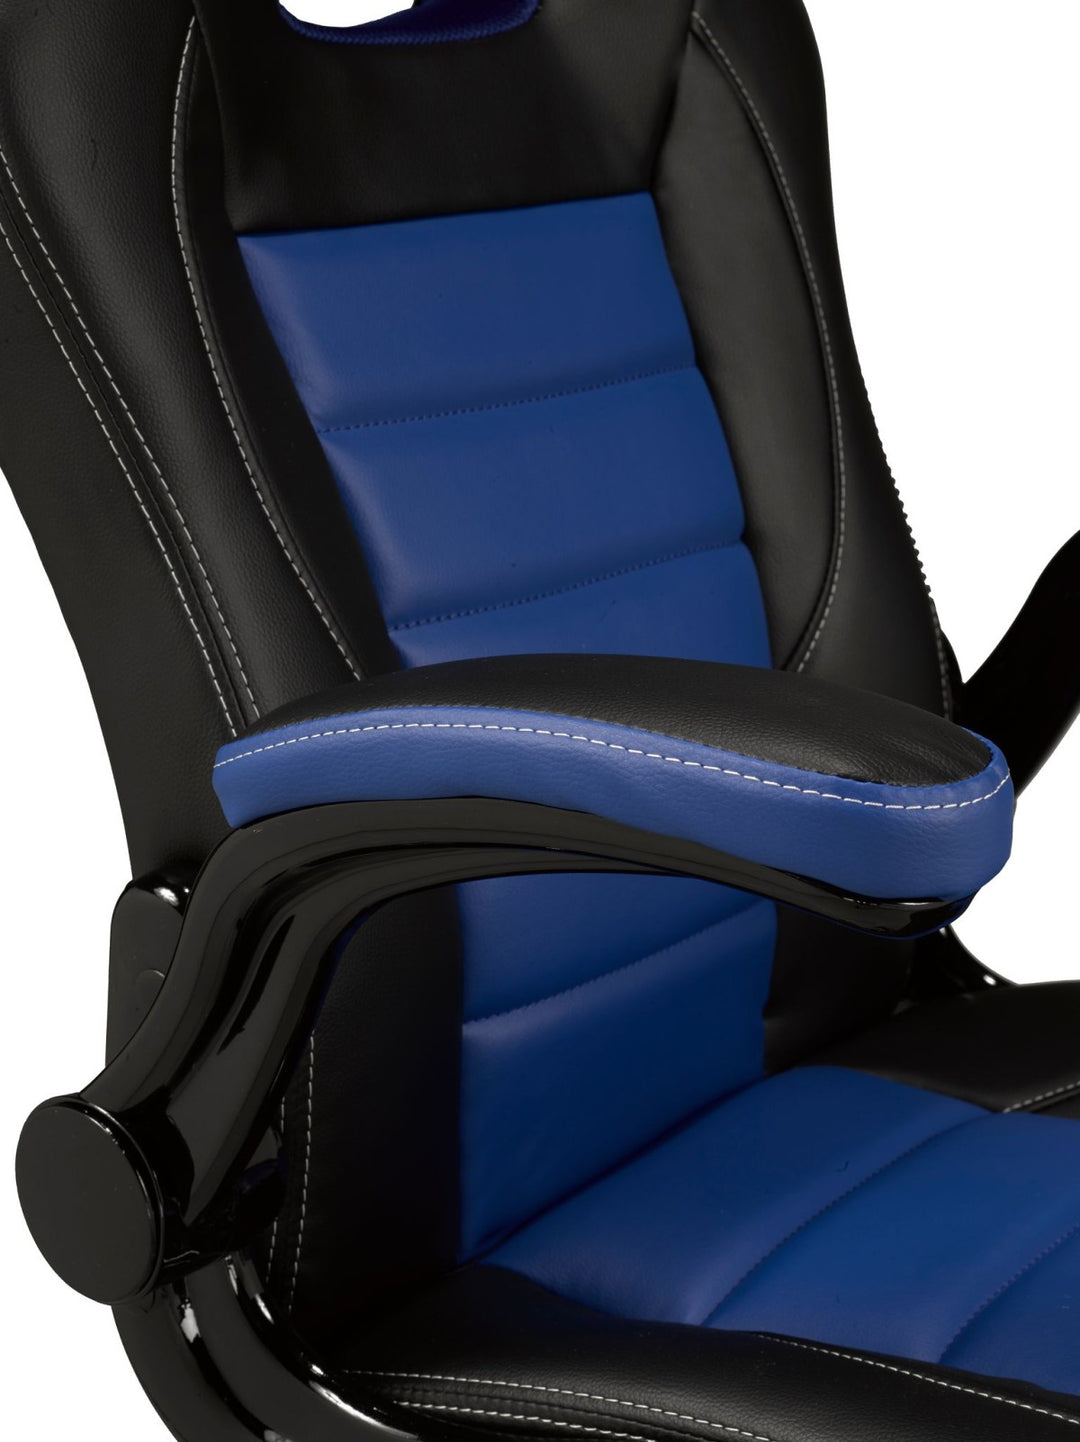 Black/Blue Gaming Chair | Ergonomic Design, Lumbar Support, Adjustable Armrests | Stylish Faux Leather Upholstery